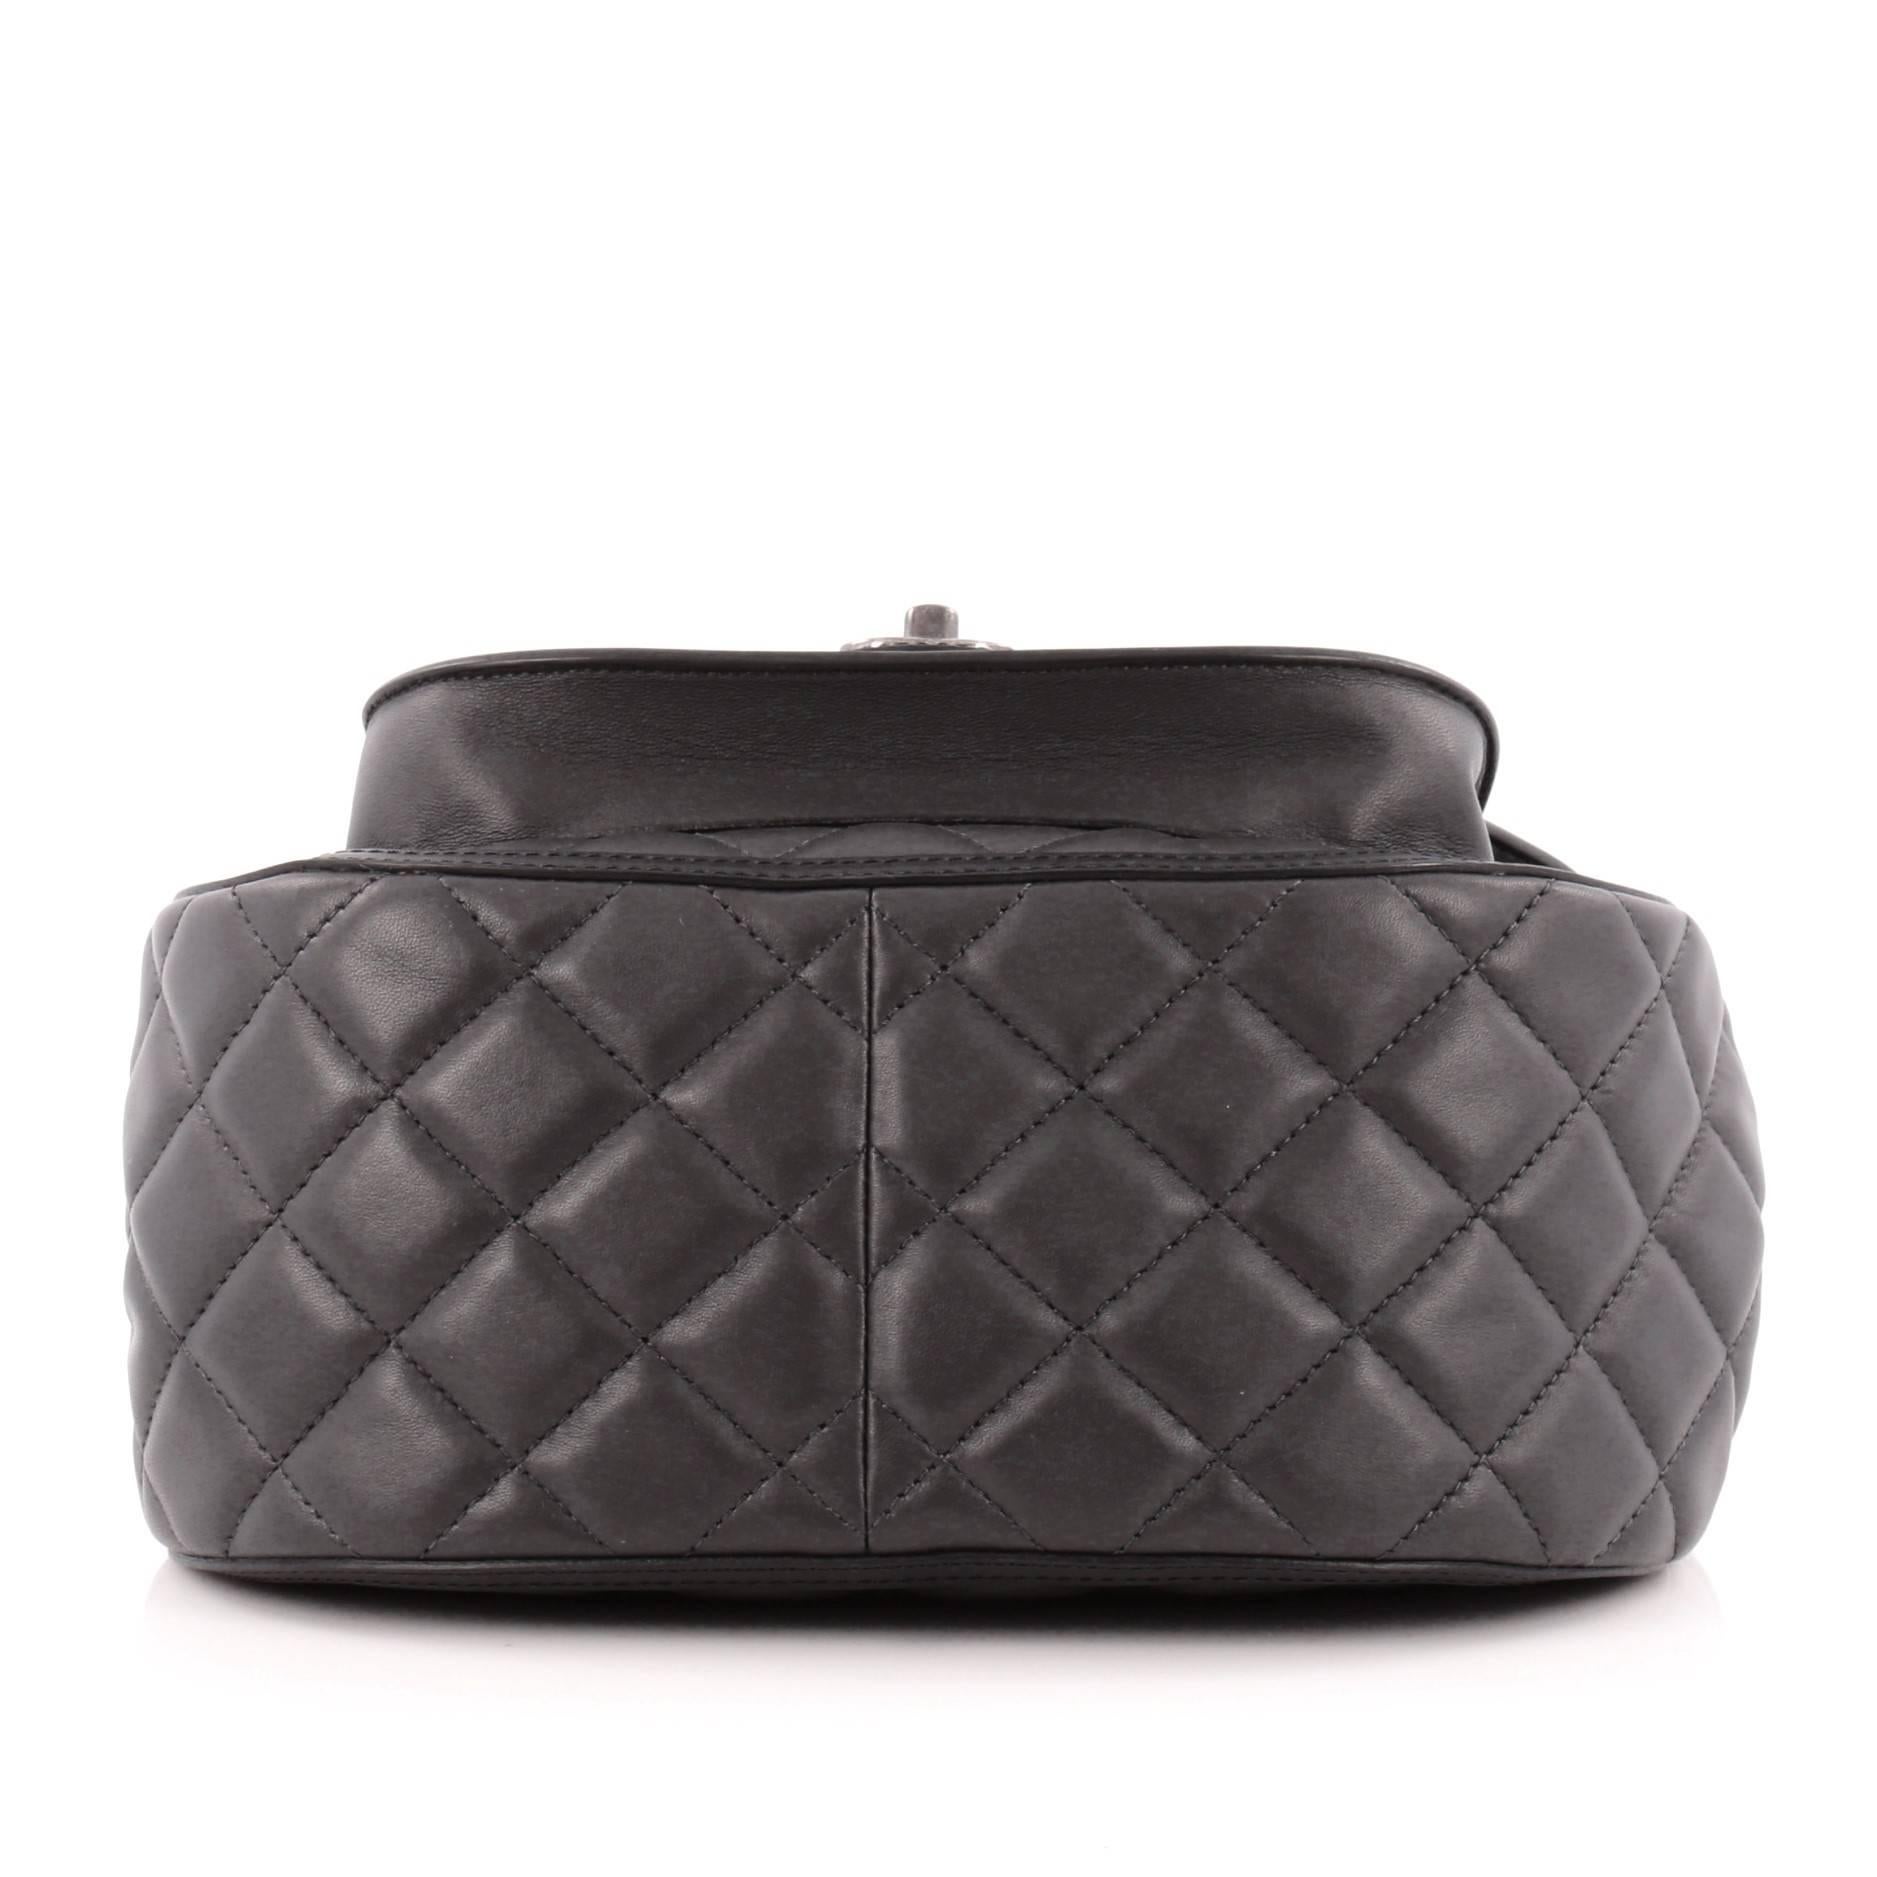 Black Chanel Saddle Bag Quilted Calfskin and Pony Hair Medium